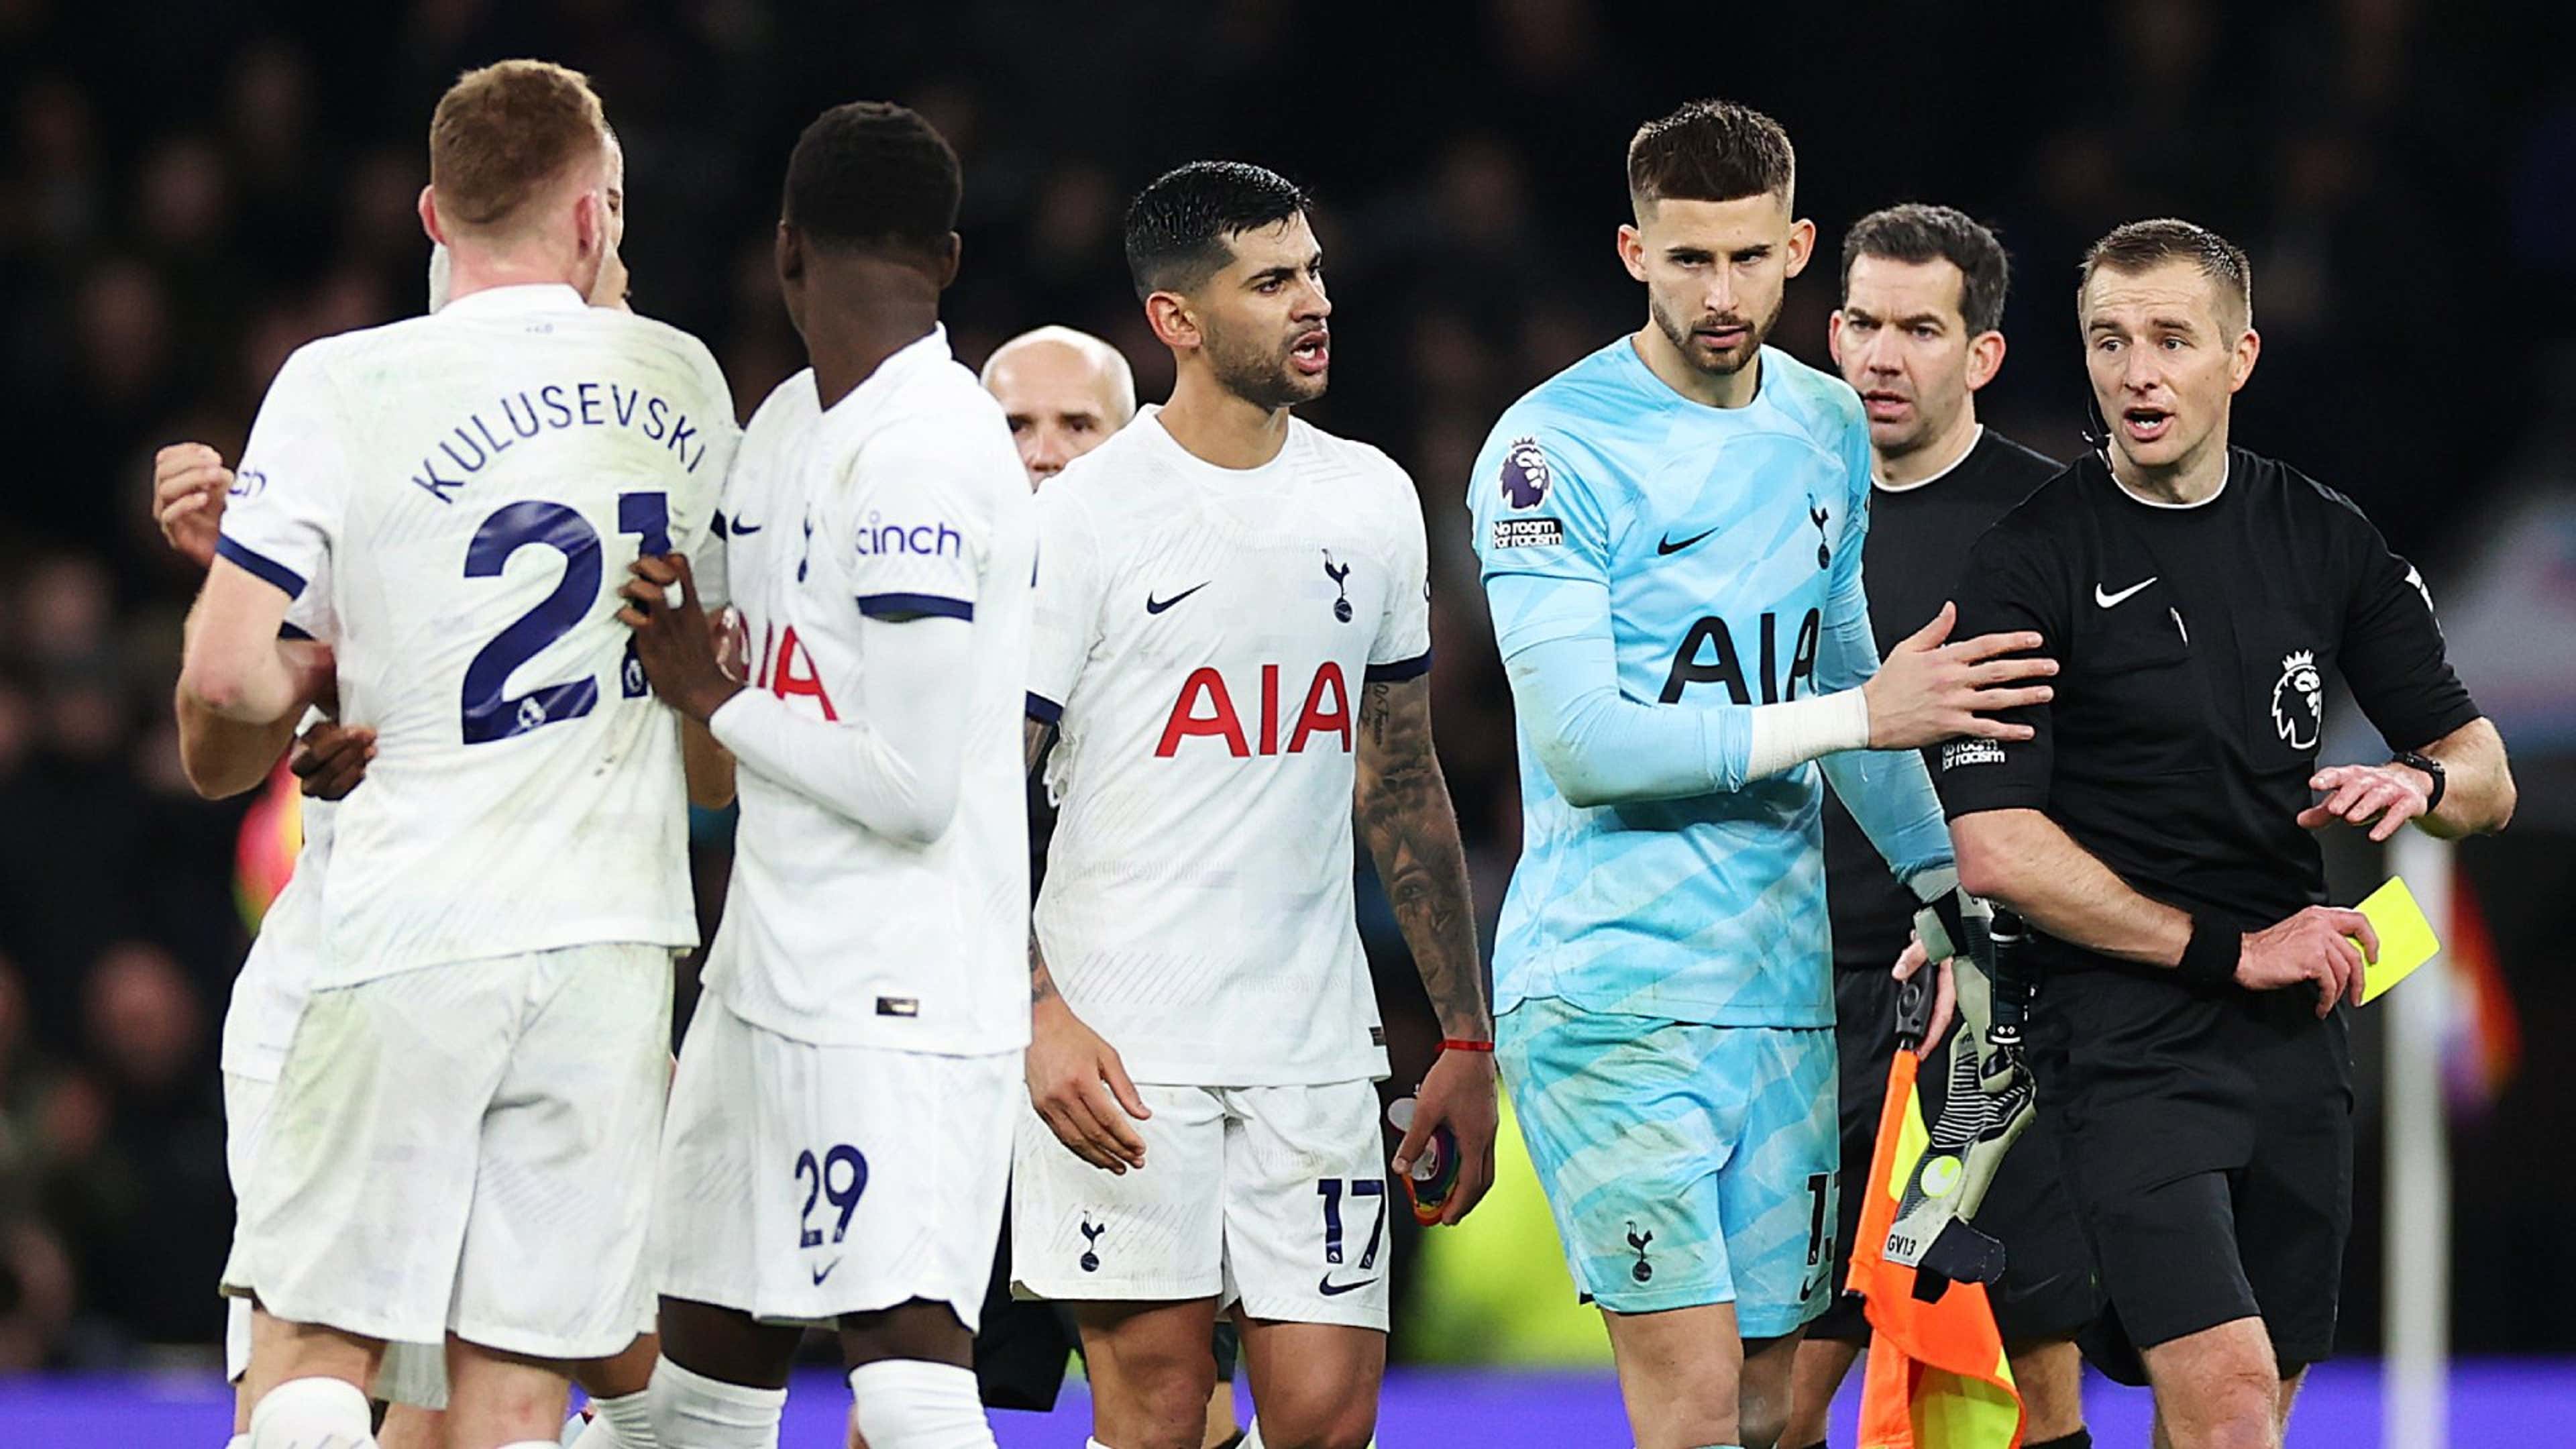 Low-energy Tottenham look set for another season without silverware